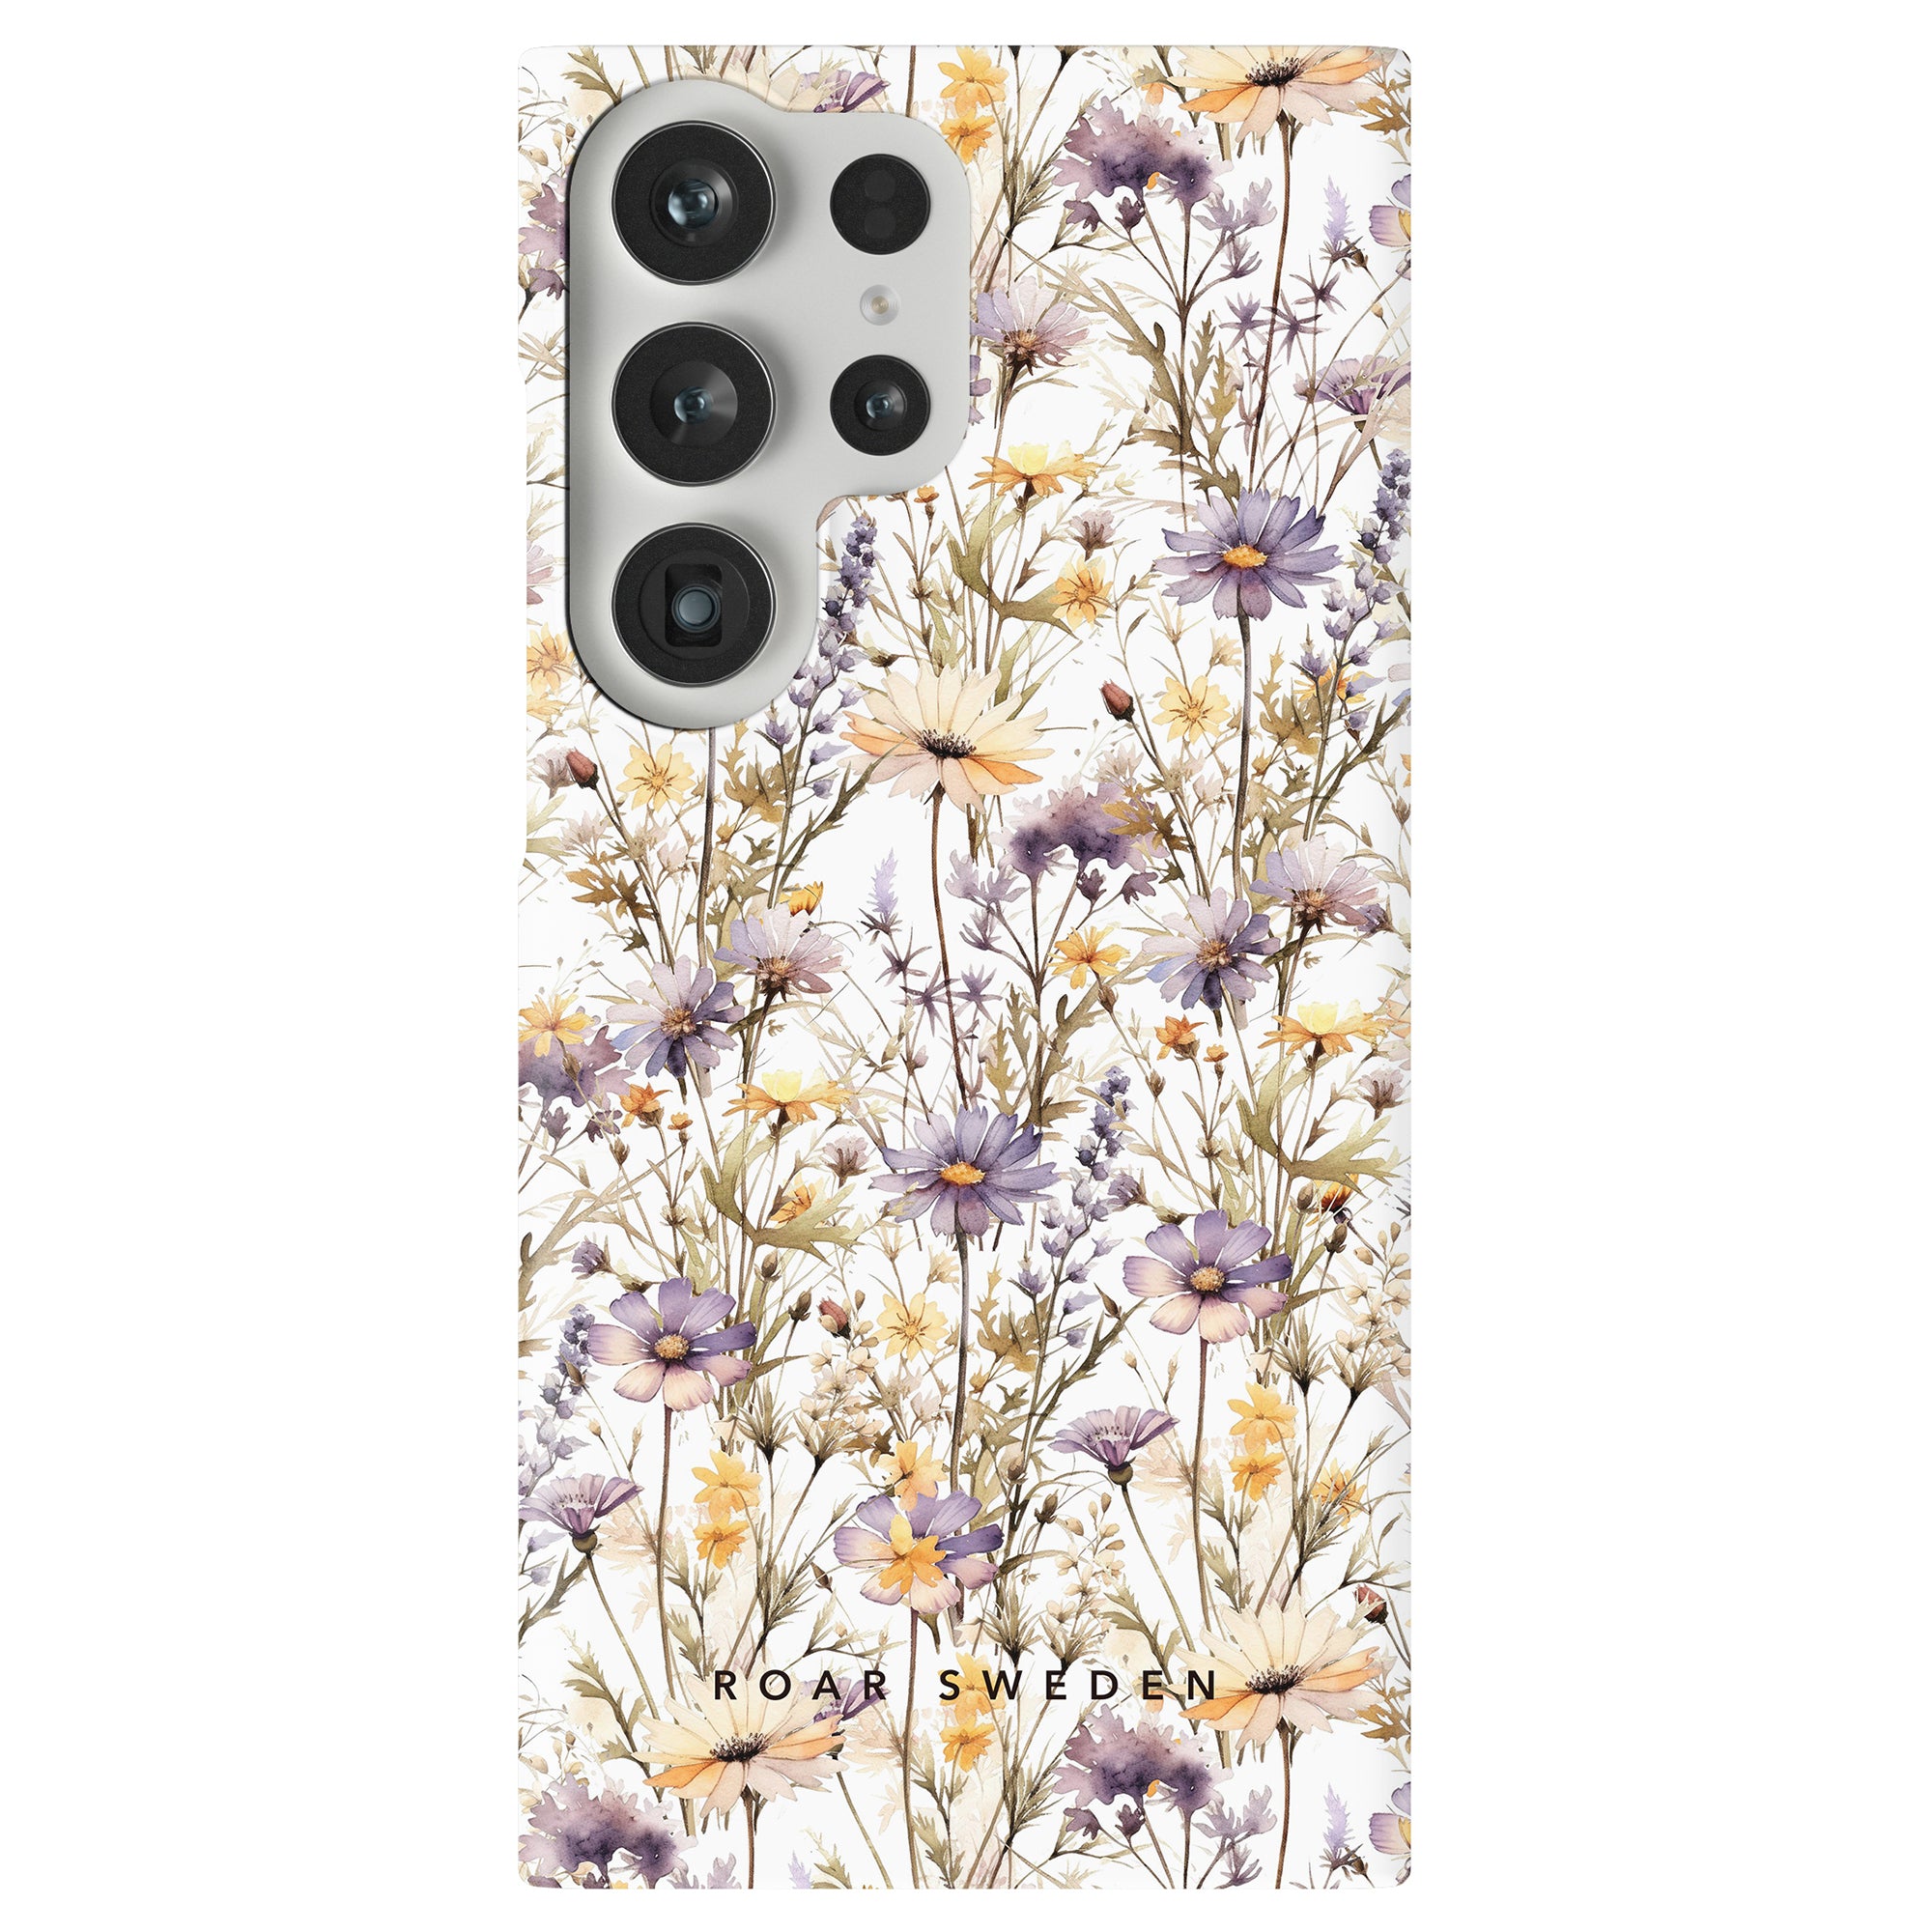 A smartphone with multiple camera lenses is encased in a Purple Wildflower - Slim case, adorned with purple and yellow flowers. The text "ROAR SWEDEN" is printed near the bottom.